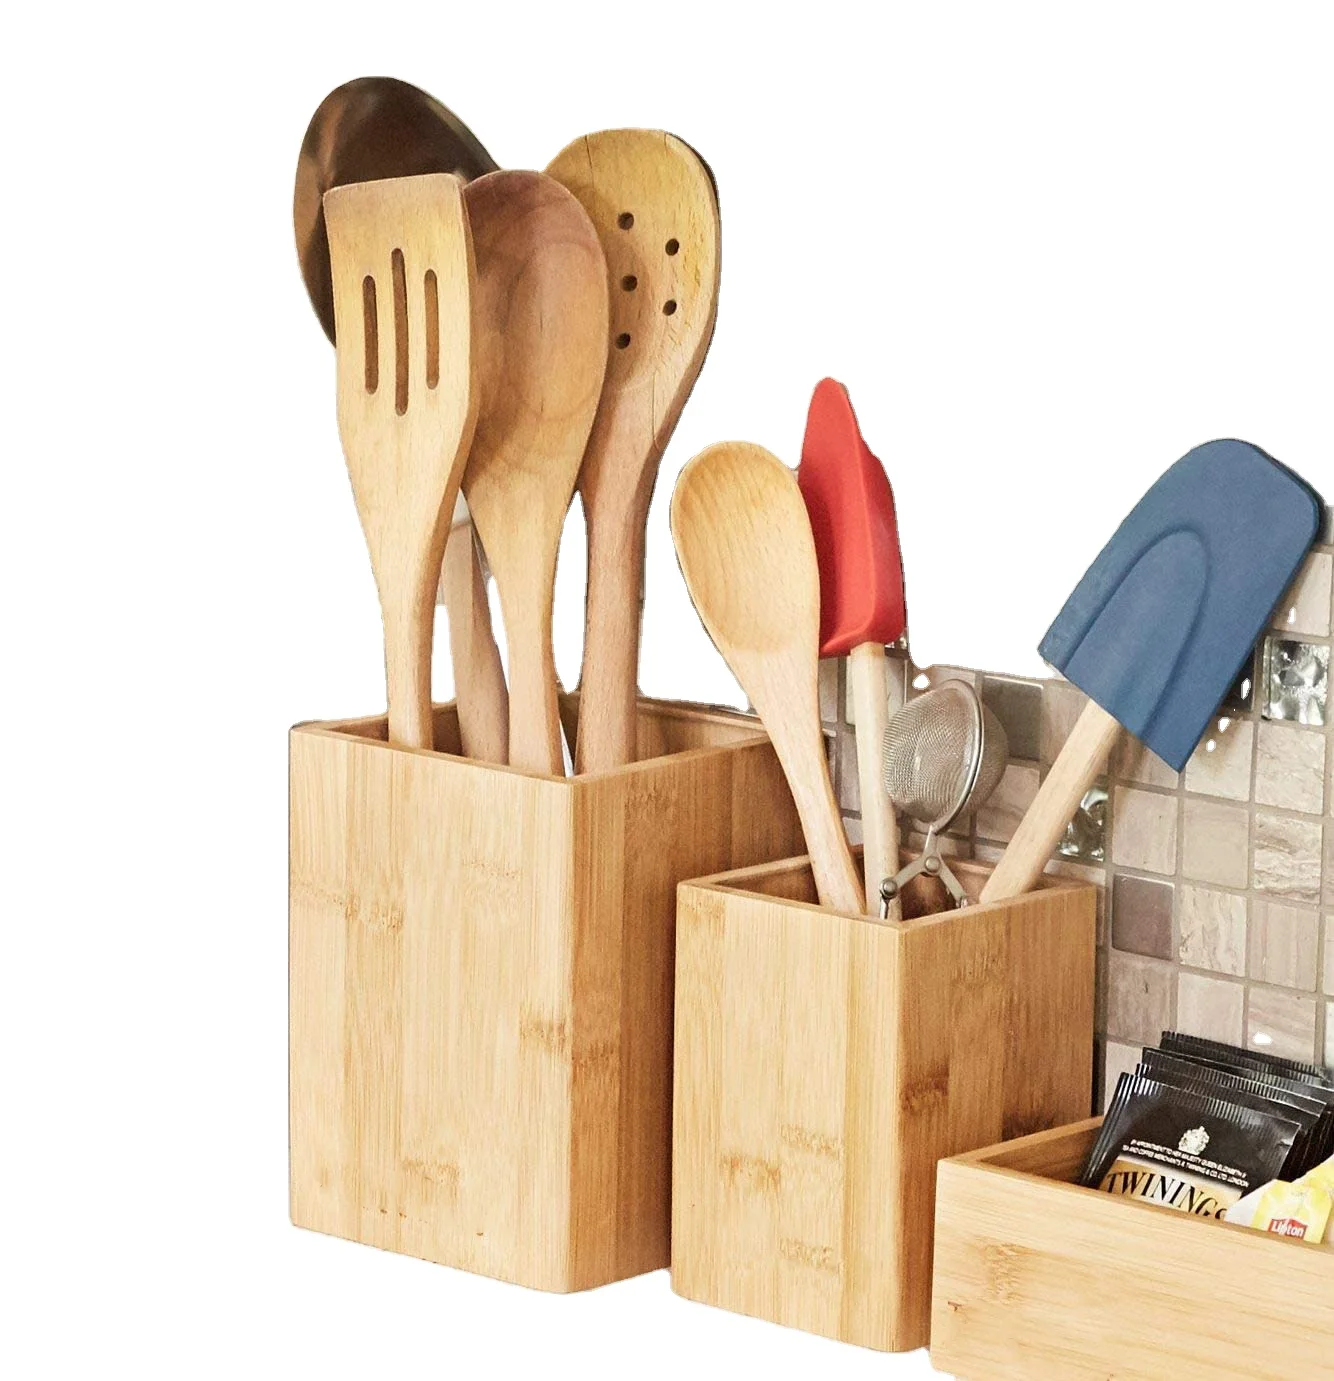 

Multi-Function Set of 4 Bamboo Box with Internal Moisture Guard For Kitchen Utensil Holder, Natural